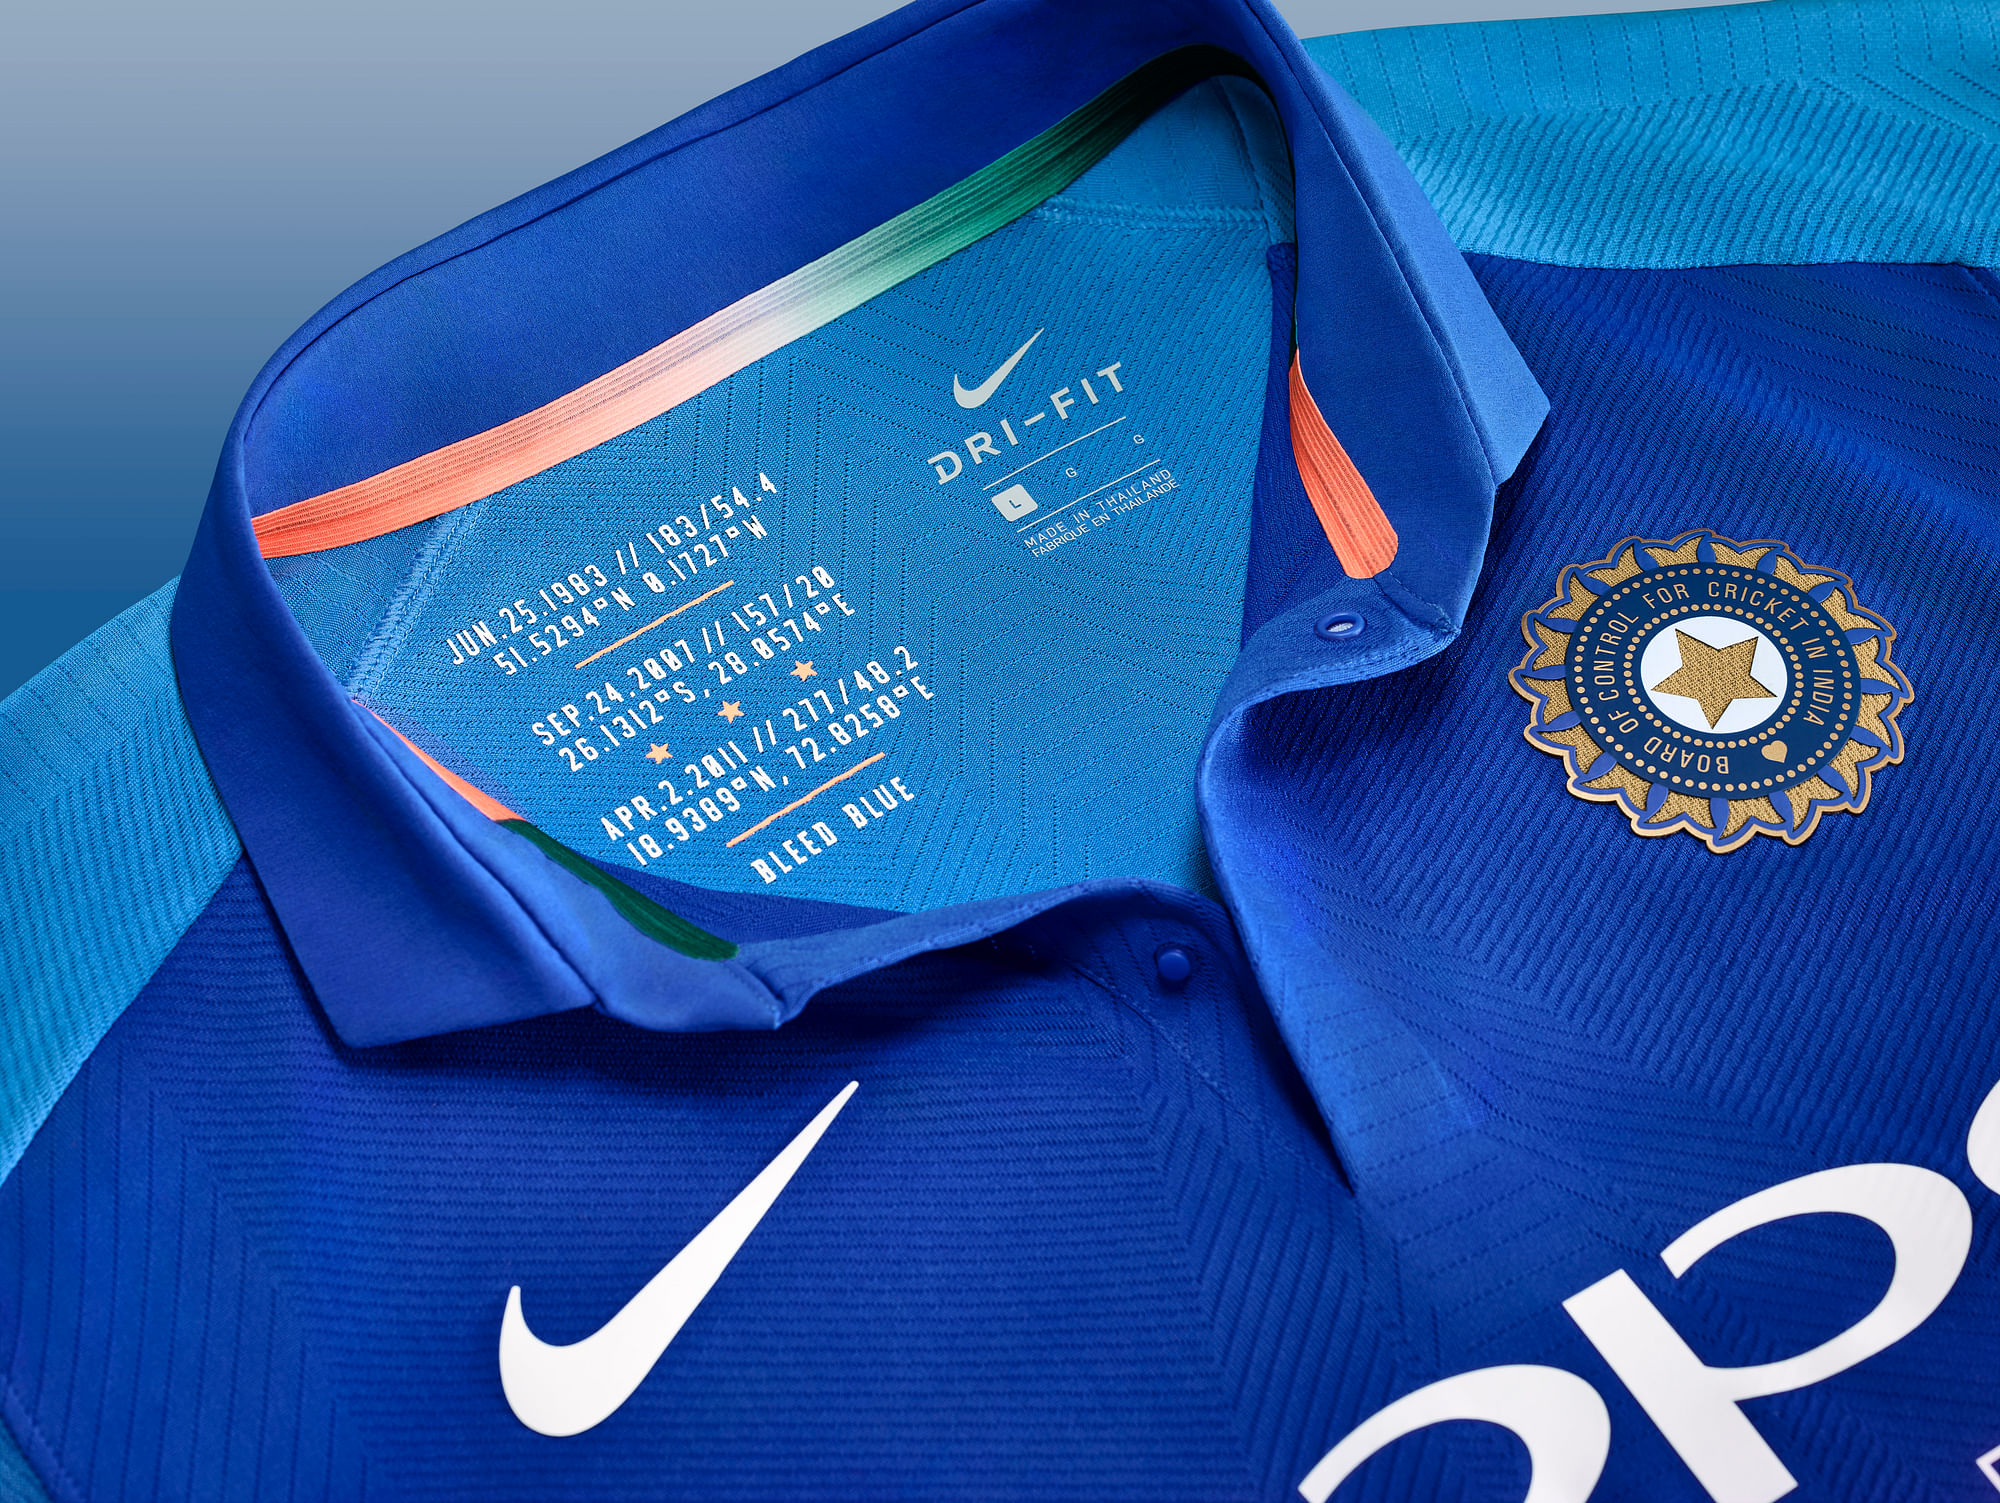 India World Cup 2019 New Jersey Here’s a Look at the Features of Team